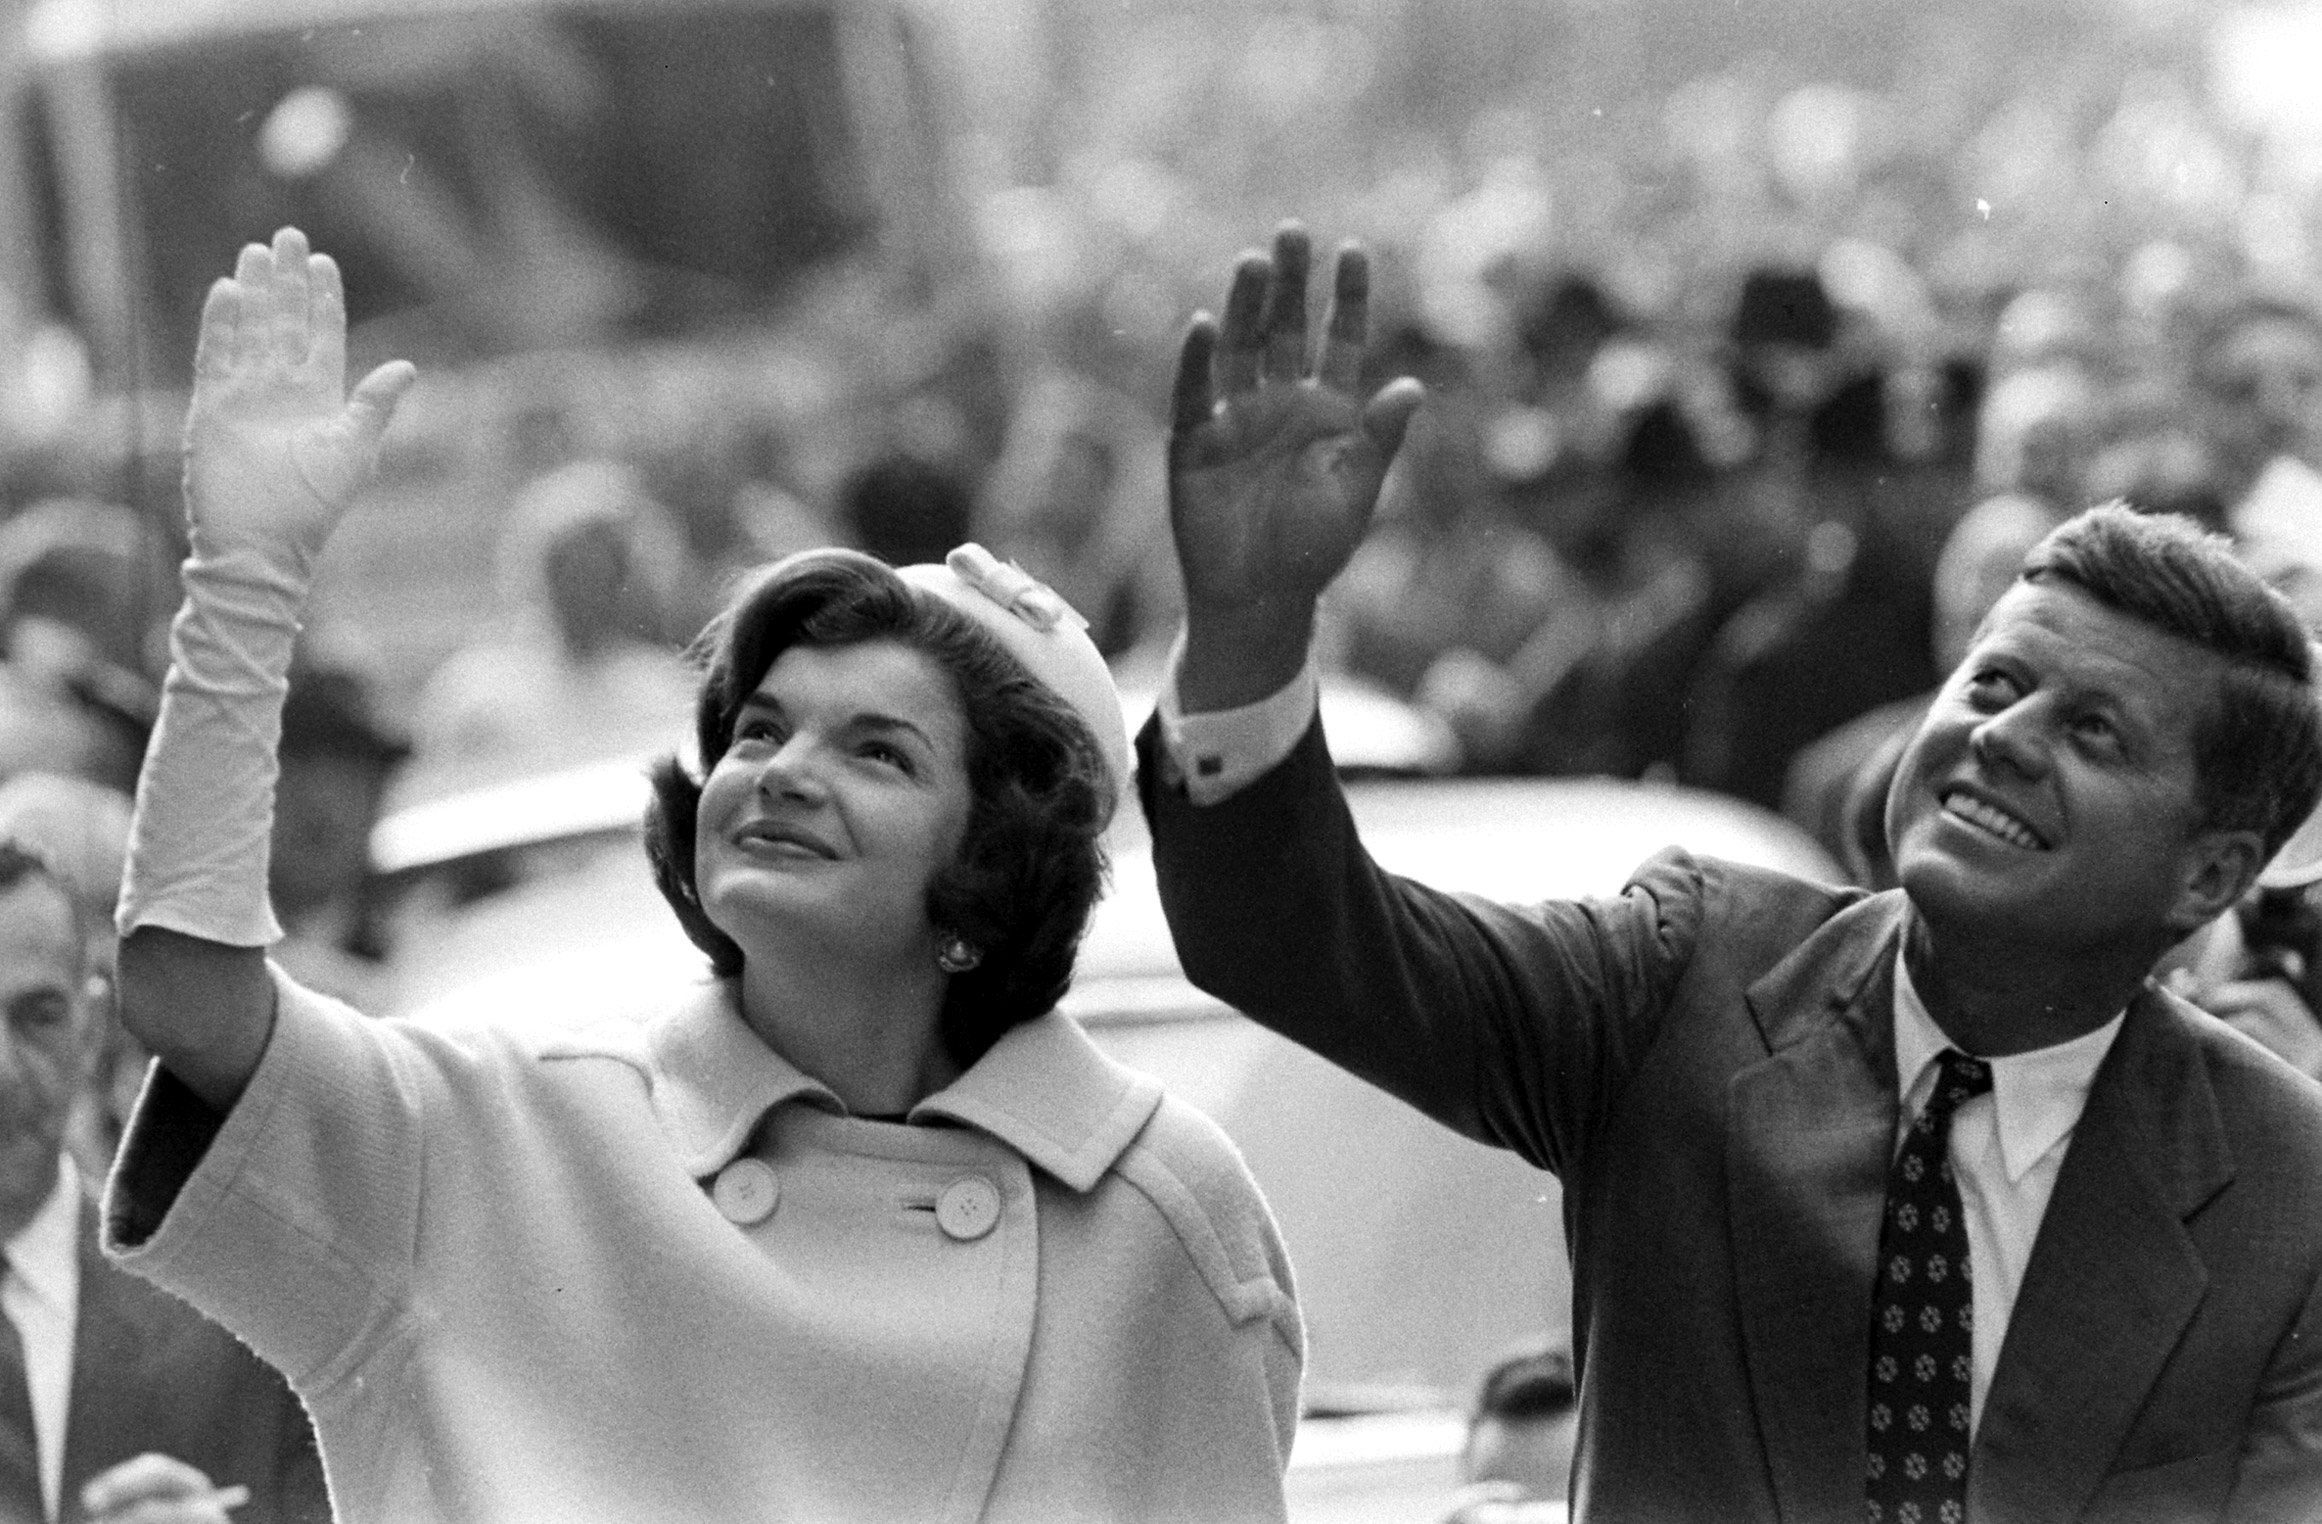 John F. Kennedy and wife Jackie waving to a crowd during campaign appearance.